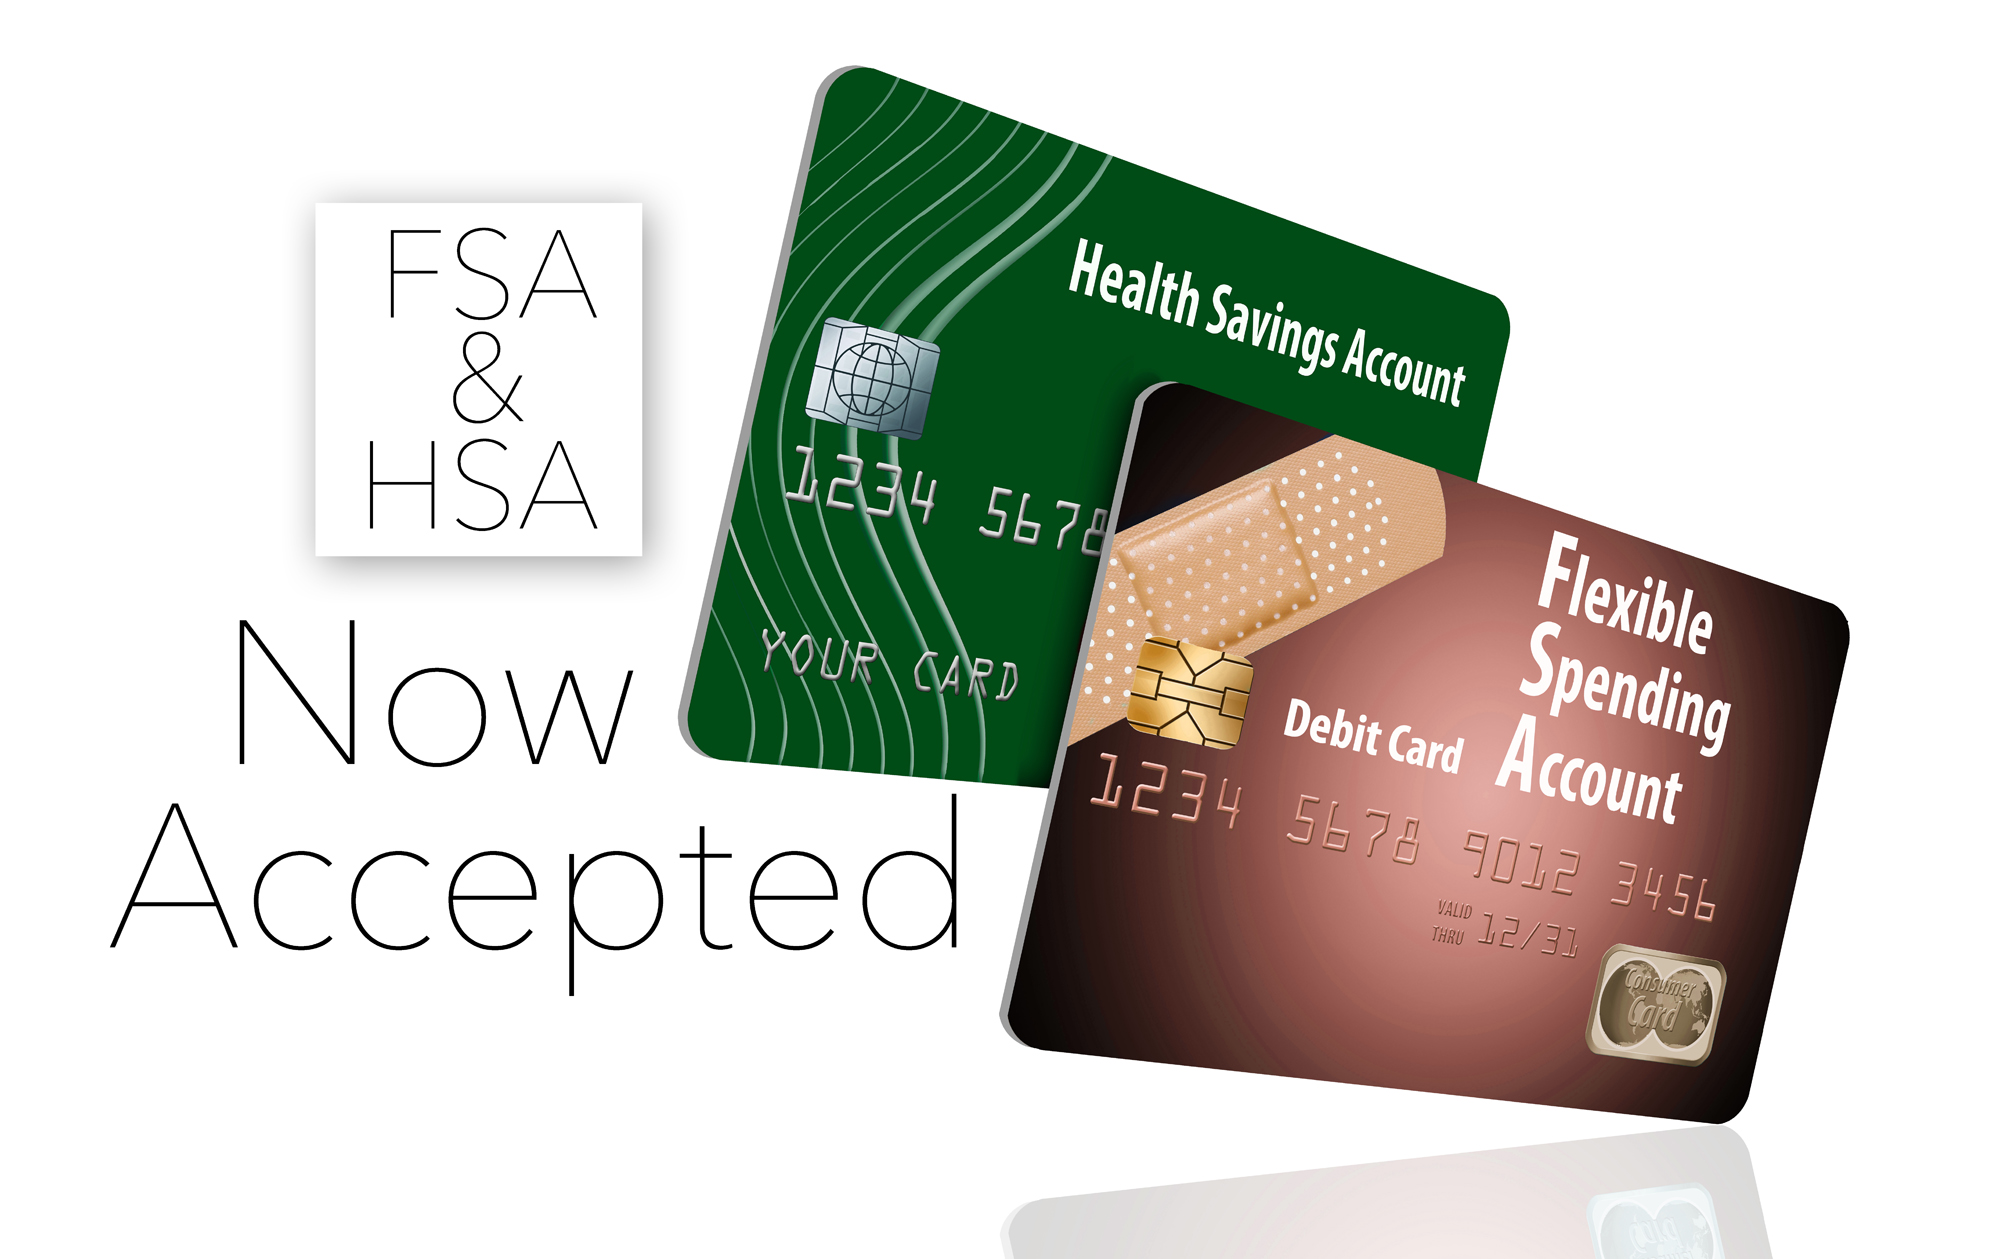 HSA FSA use it or lose it – why not use for dental plan